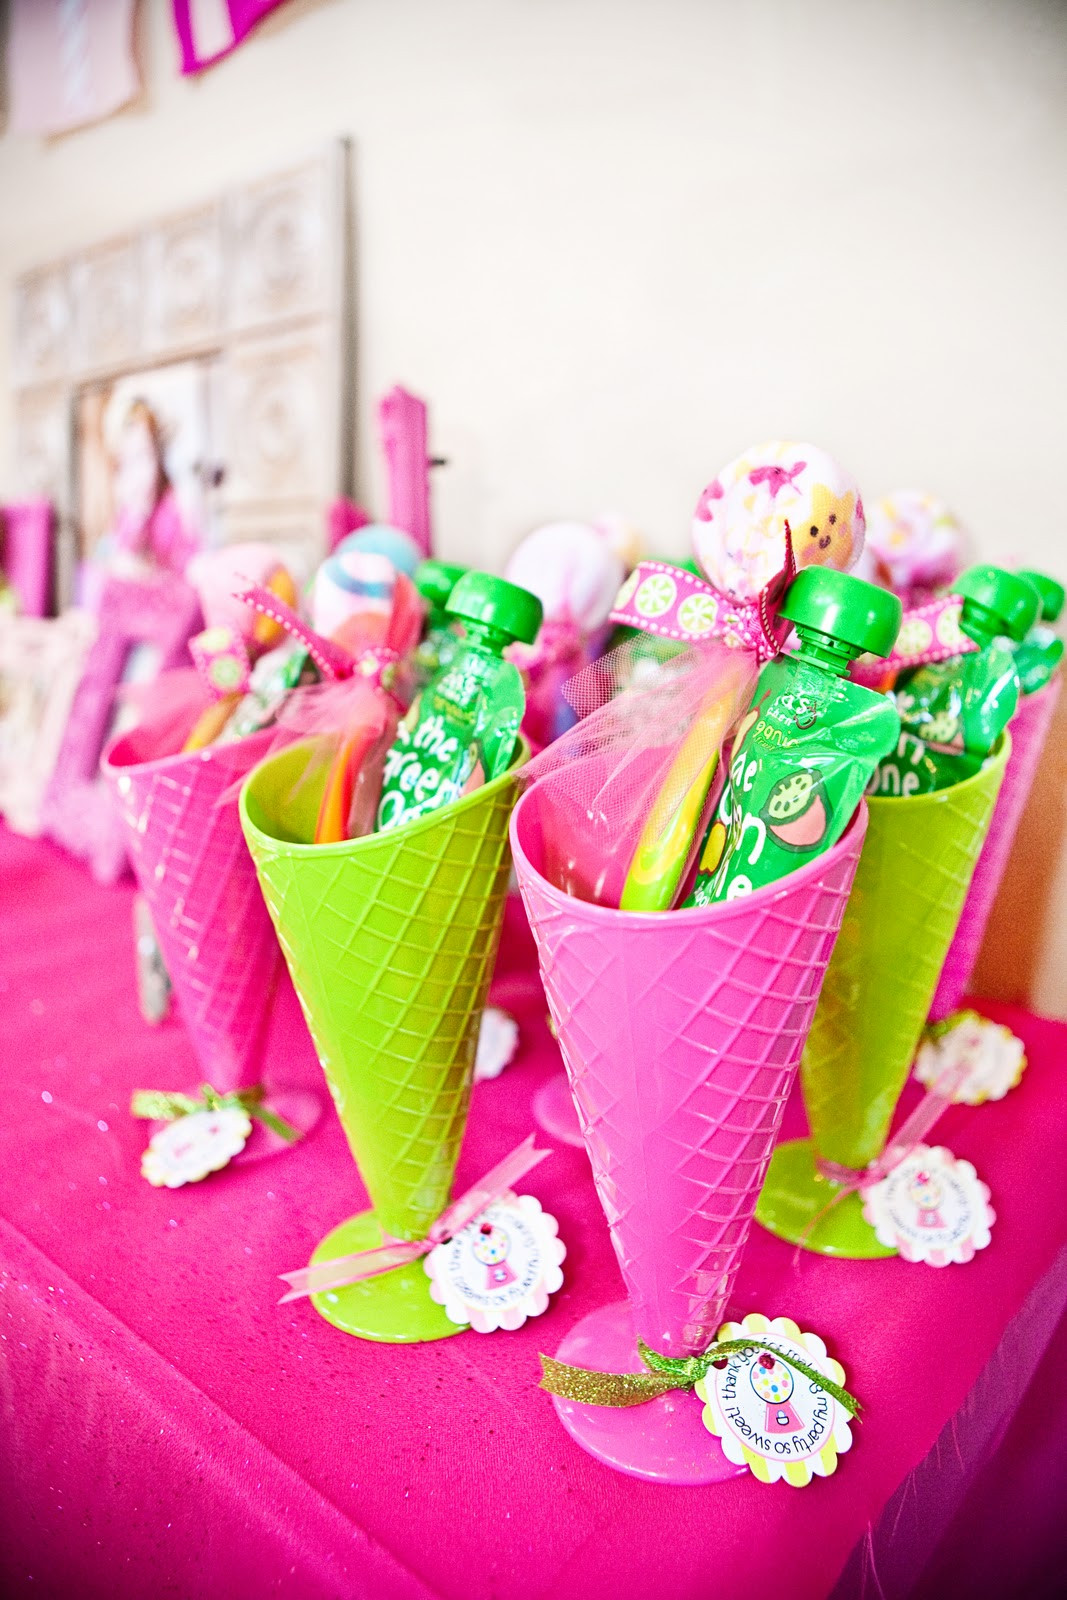 Fun Party Favors For Kids
 The TomKat Studio